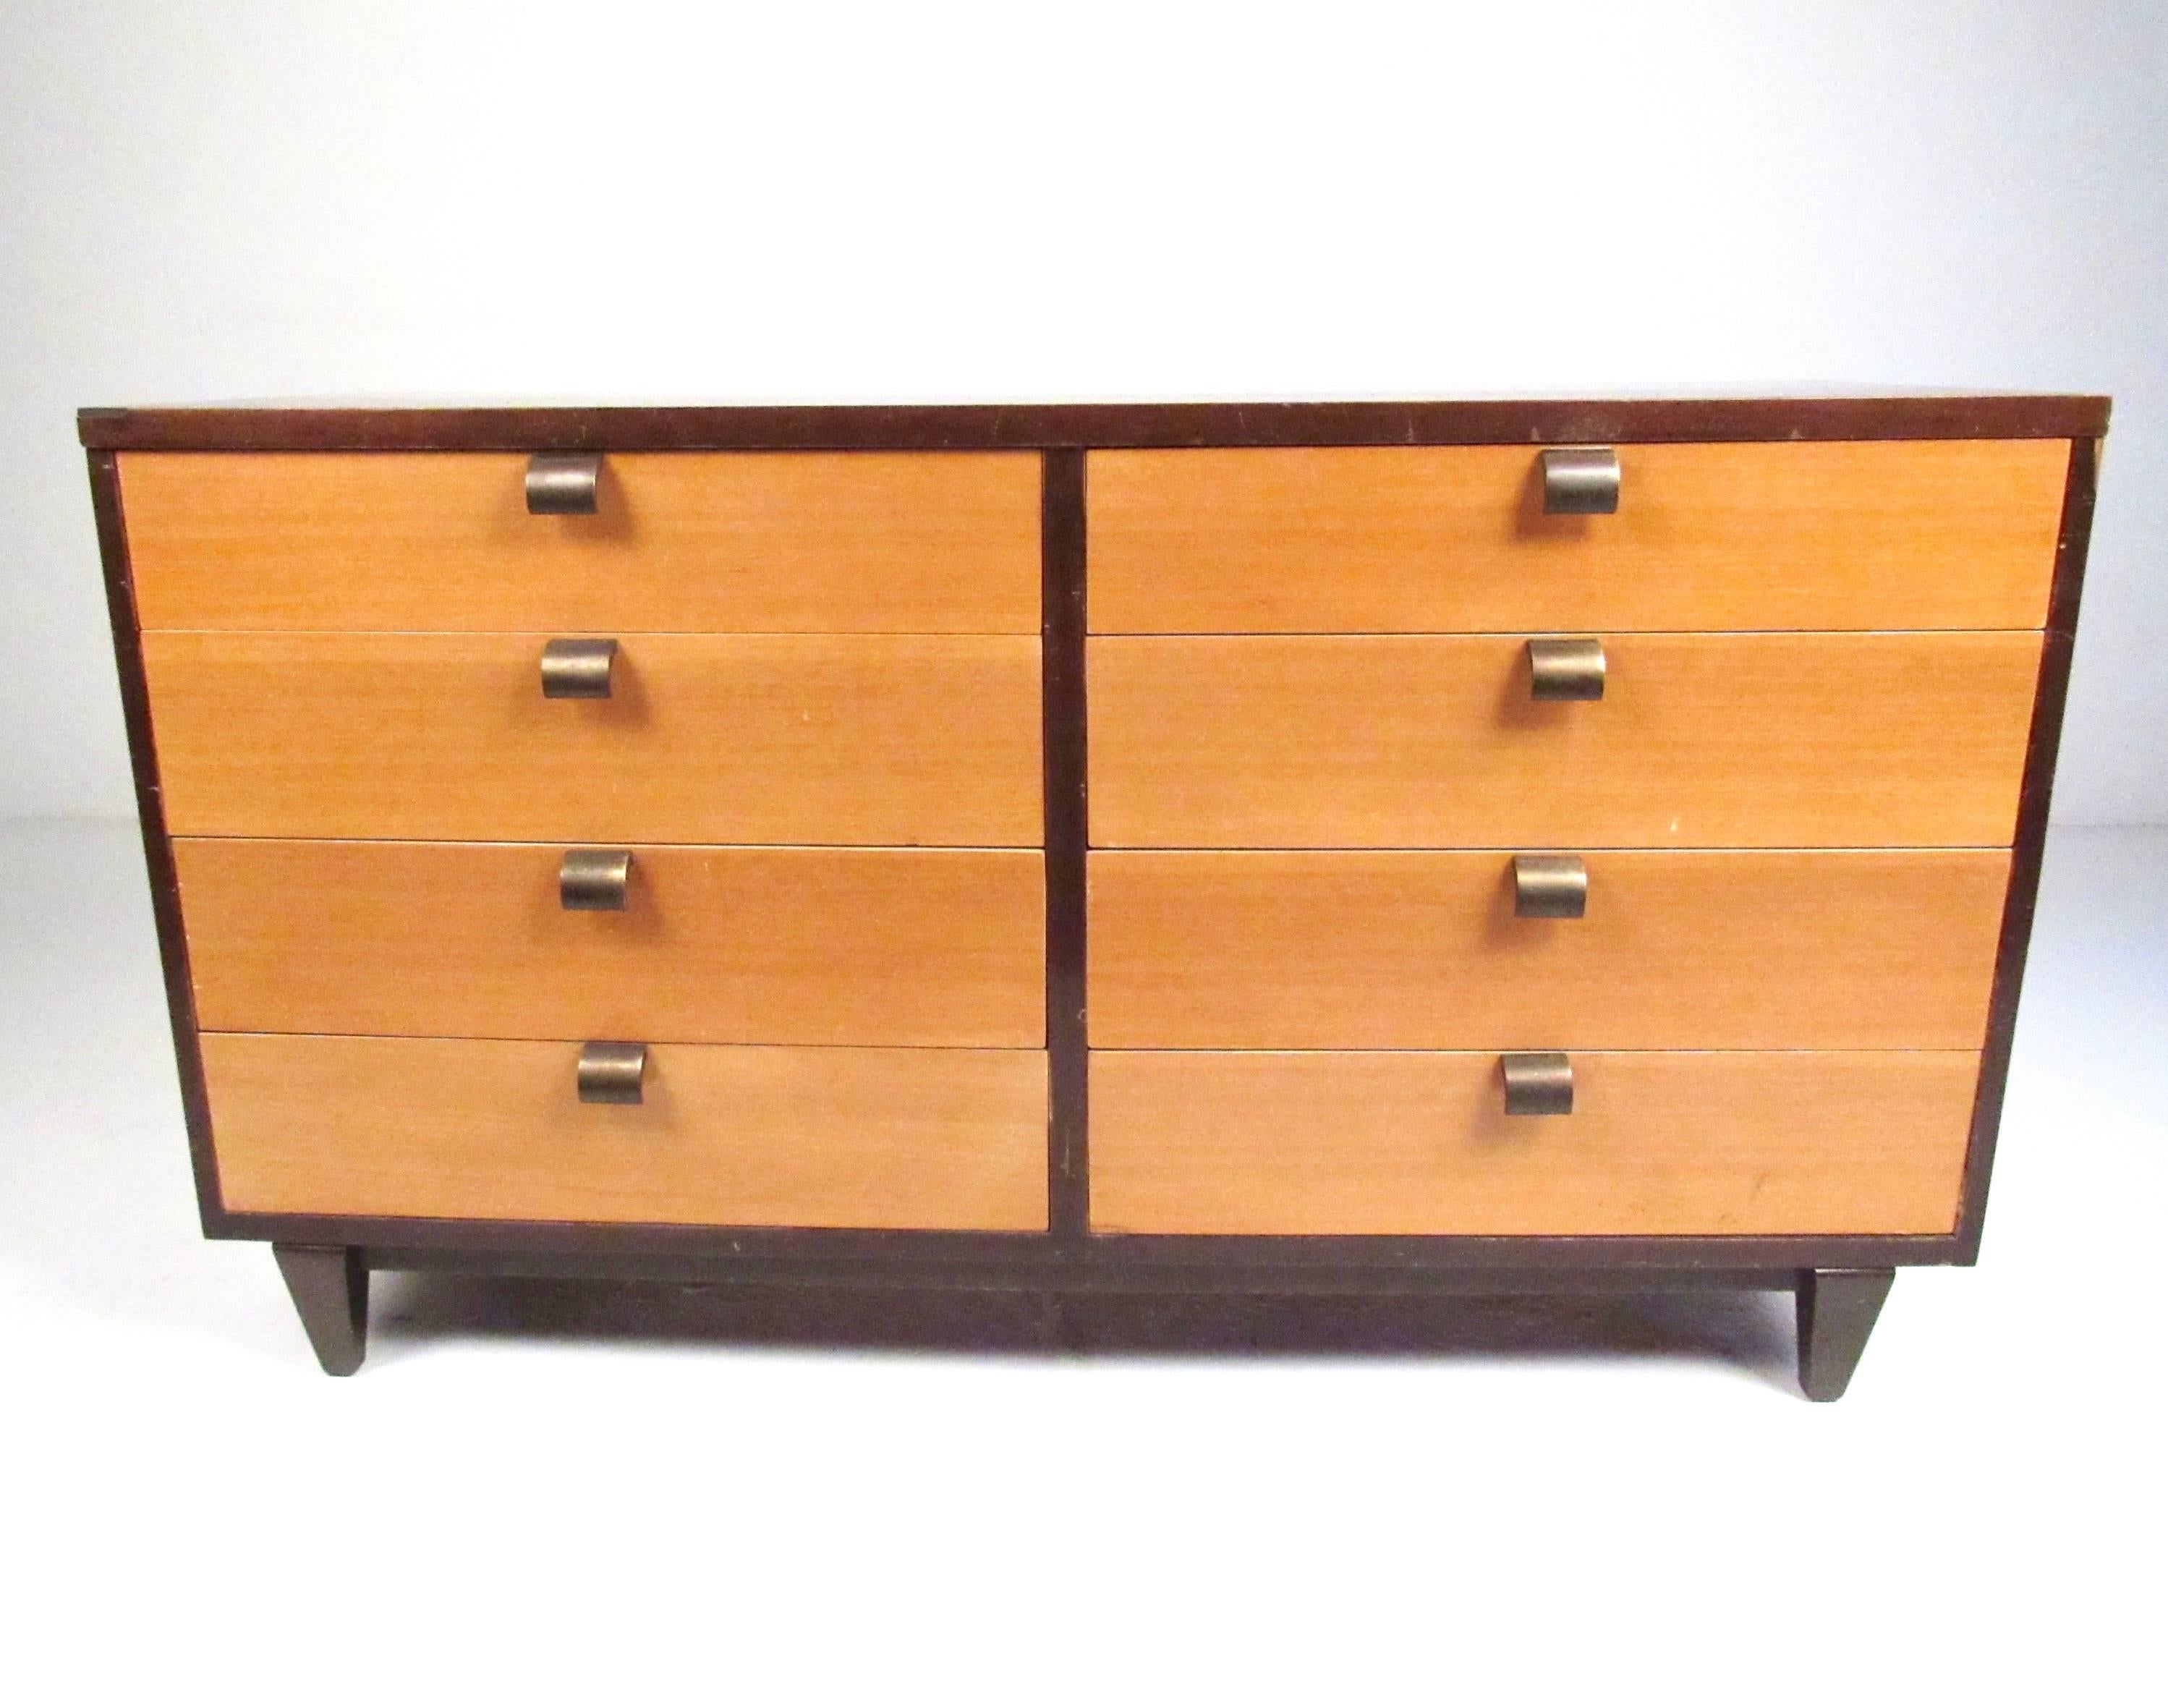 This unique pair of Mid-Century Modern bedroom dressers include a low six drawer dresser with a matching highboy. Unique two-tone wood finish is complemented wonderfully with tapered legs and stylish brass handles. Dividers split up the pairs